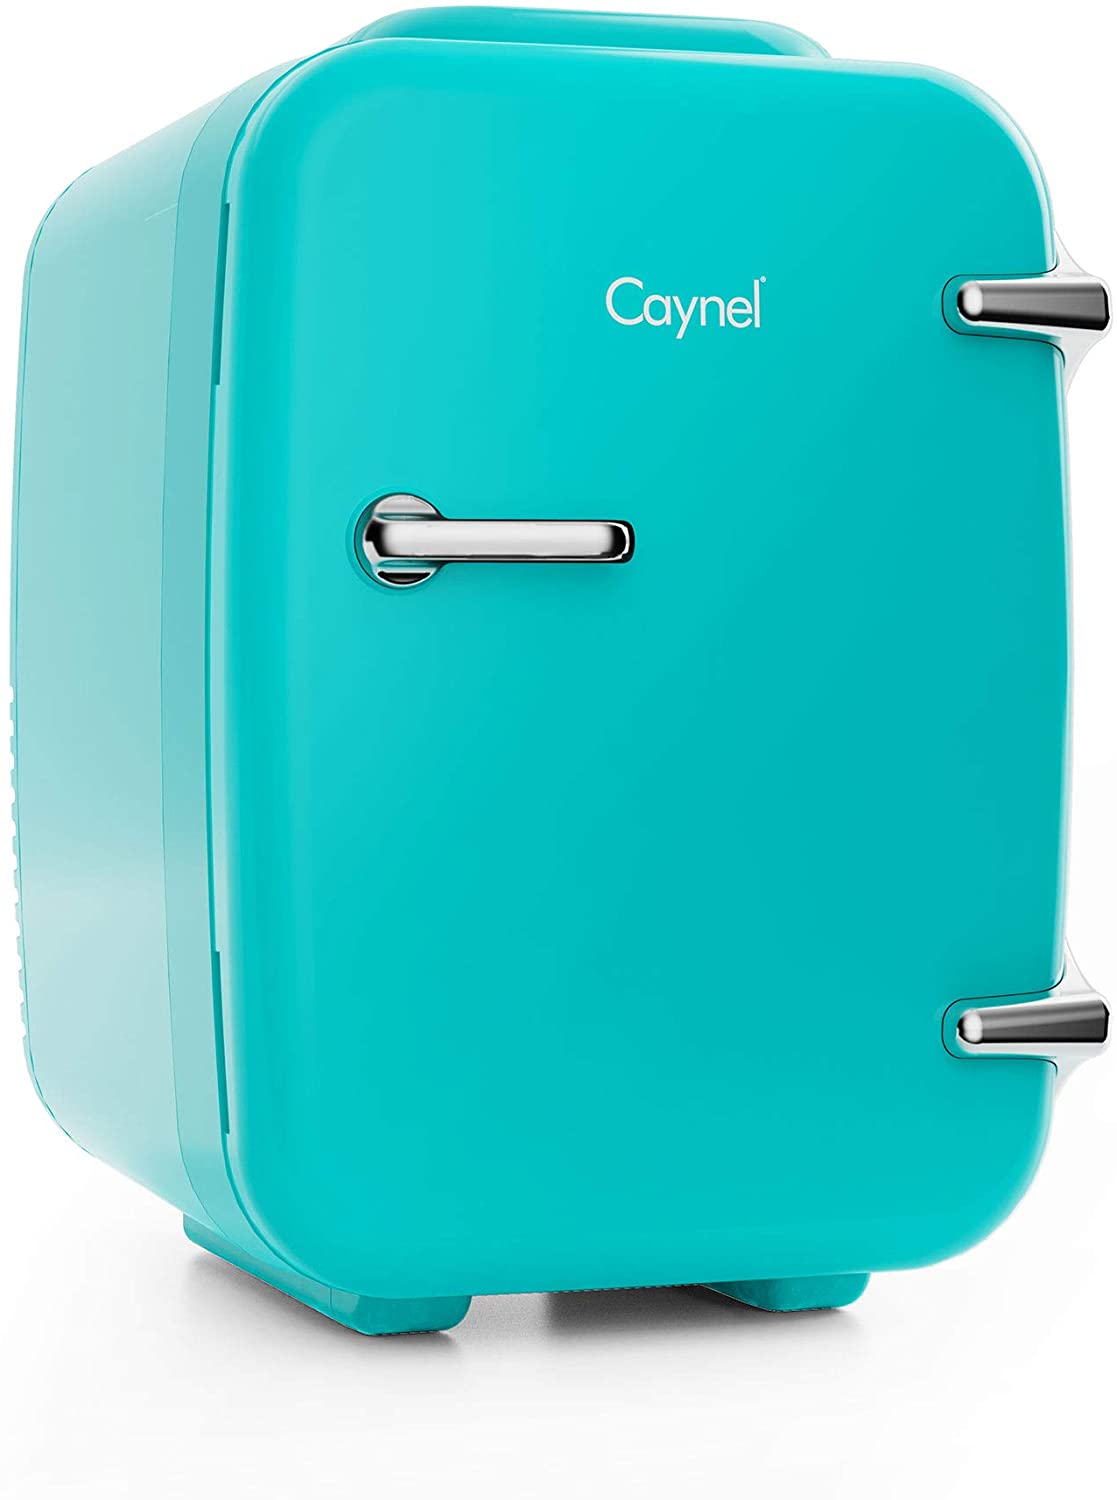 CAYNEL Mini-Fridge Portable Thermoelectric 4 Liter Cooler and Warmer For Skincare, Eco-Friendly Beauty Fridge For Foods, Medications, Cosmetics, Breast Milk, Medications Home, And Travel Use